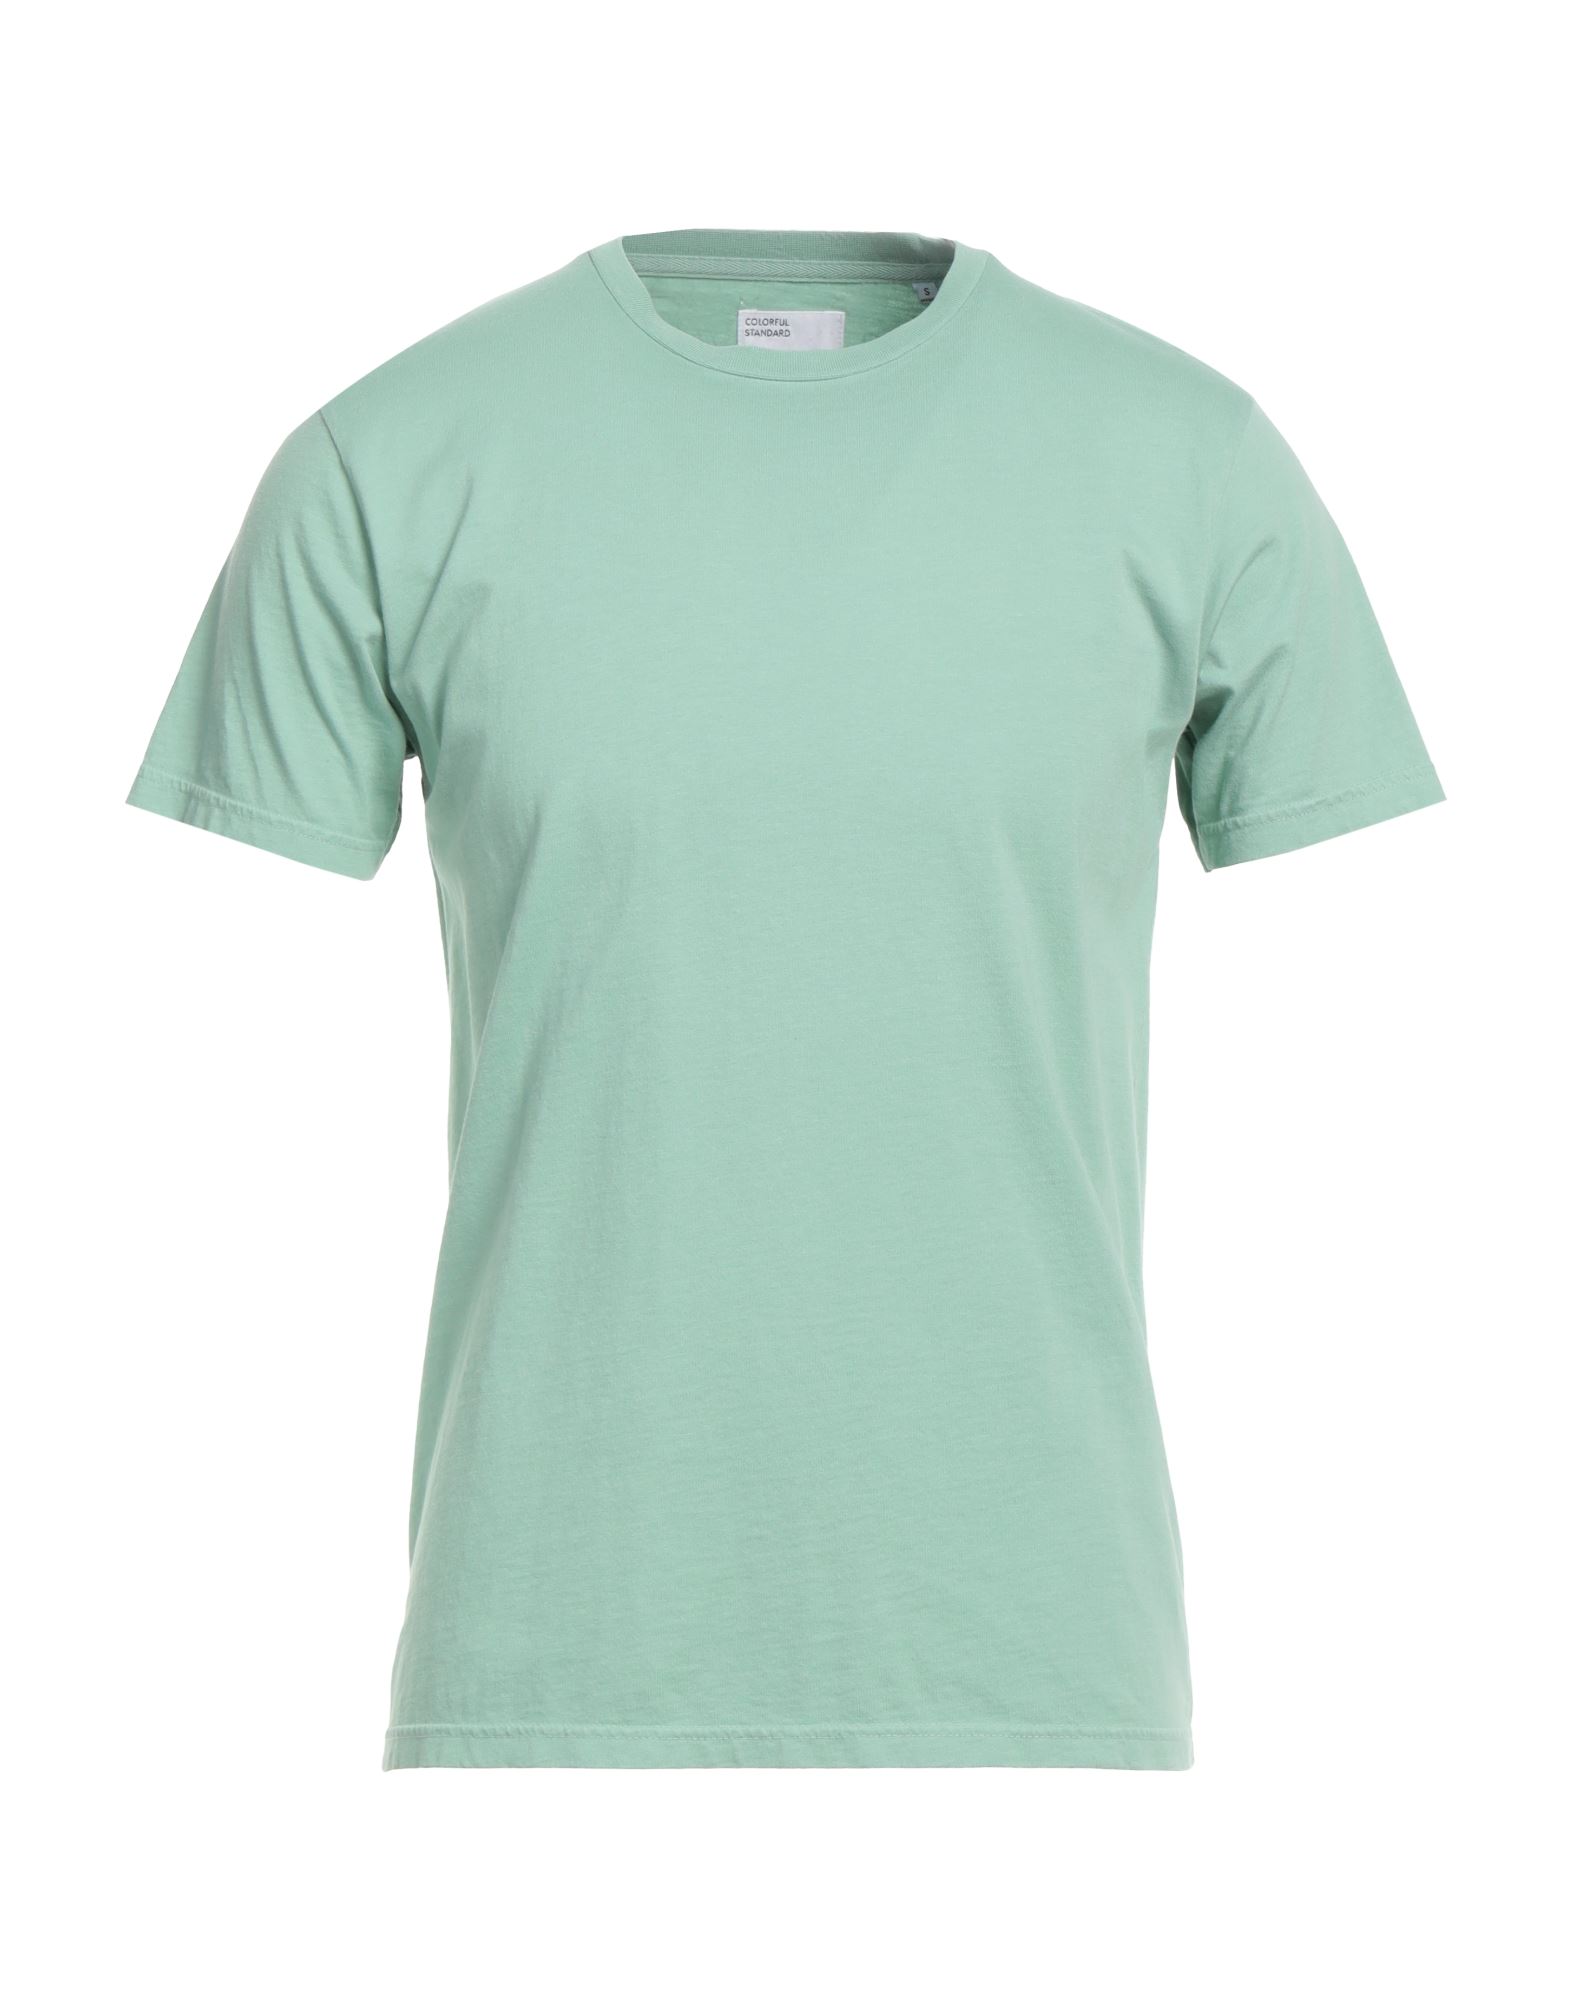 COLORFUL STANDARD COLORFUL STANDARD MAN T-SHIRT SAGE GREEN SIZE S ORGANIC COTTON